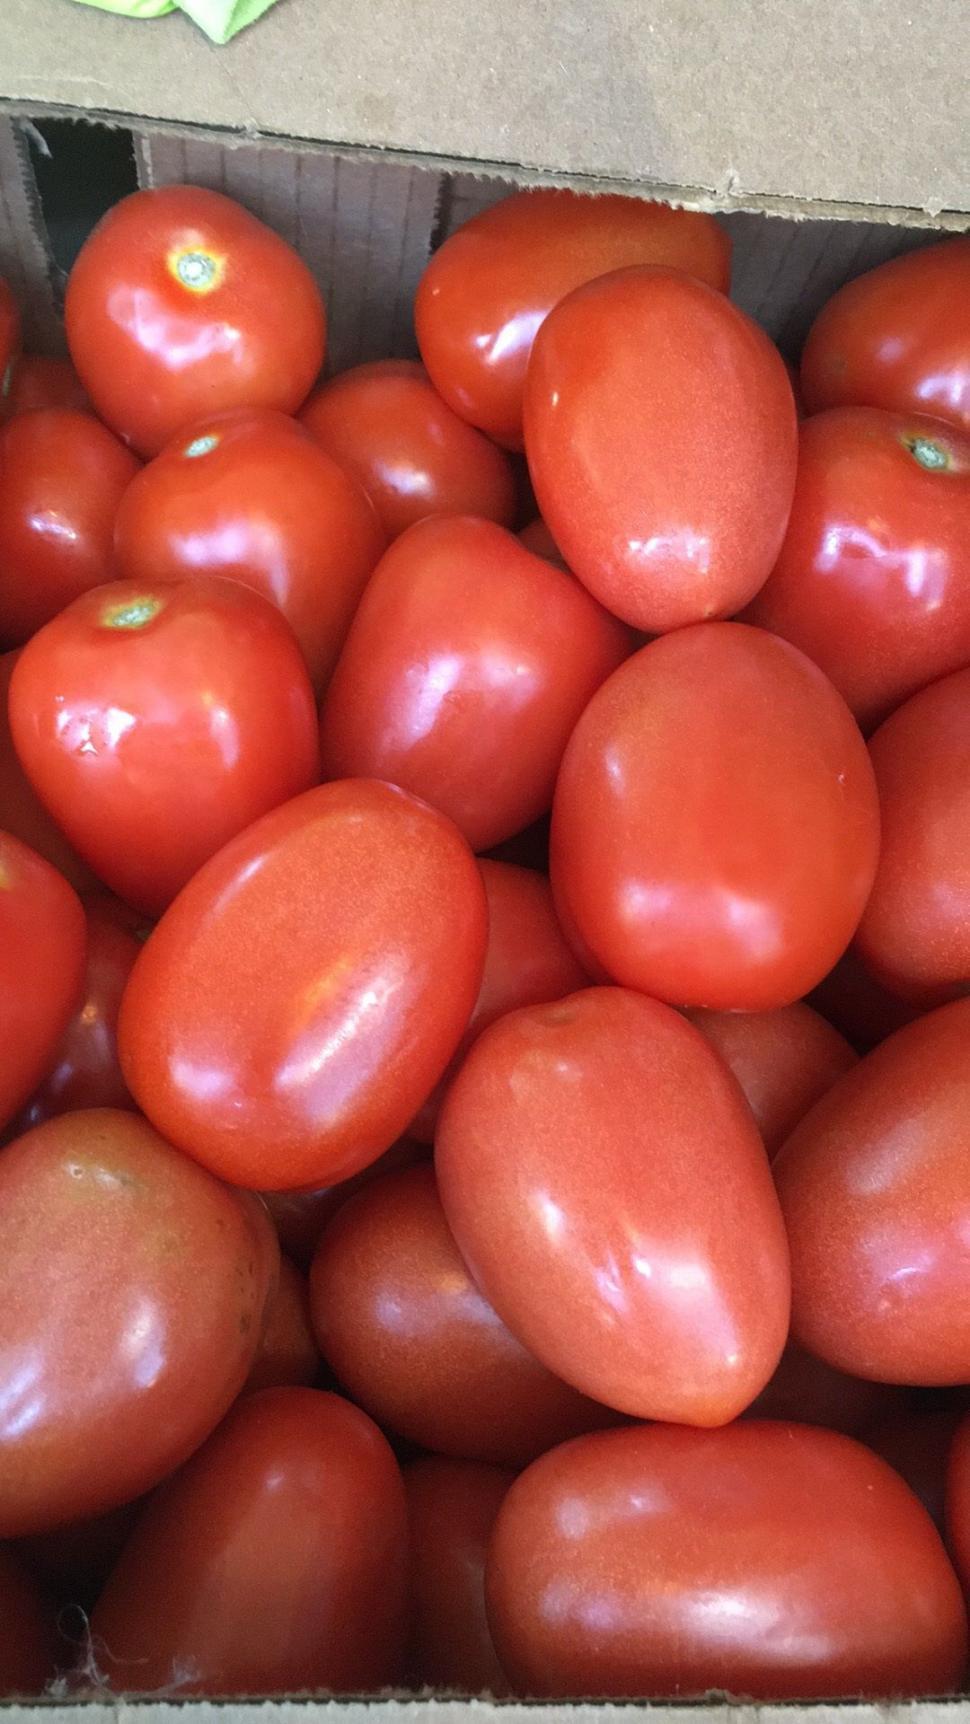 Free Image of Tomatoes on Display in Market 